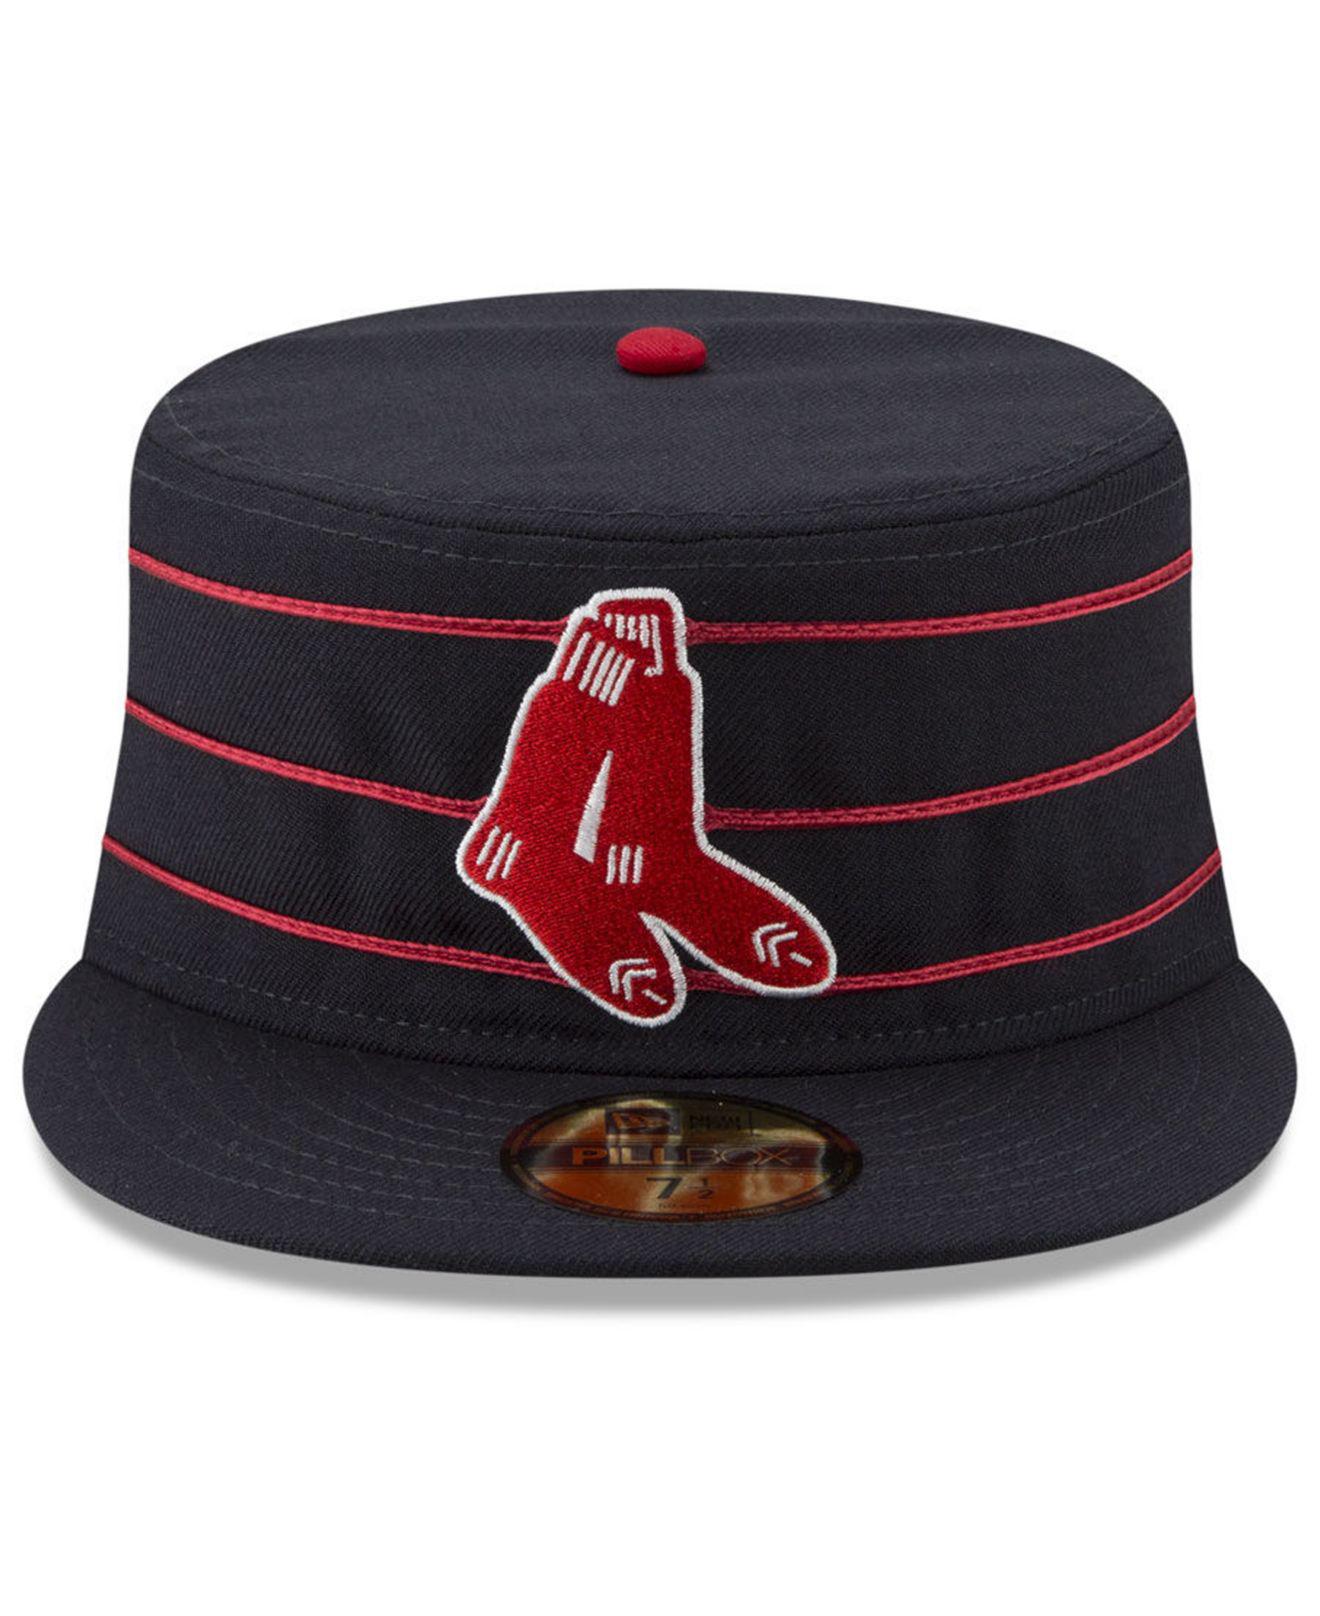 New Era Boston Red Sox CapsuleRoos Collection Capsule Hats